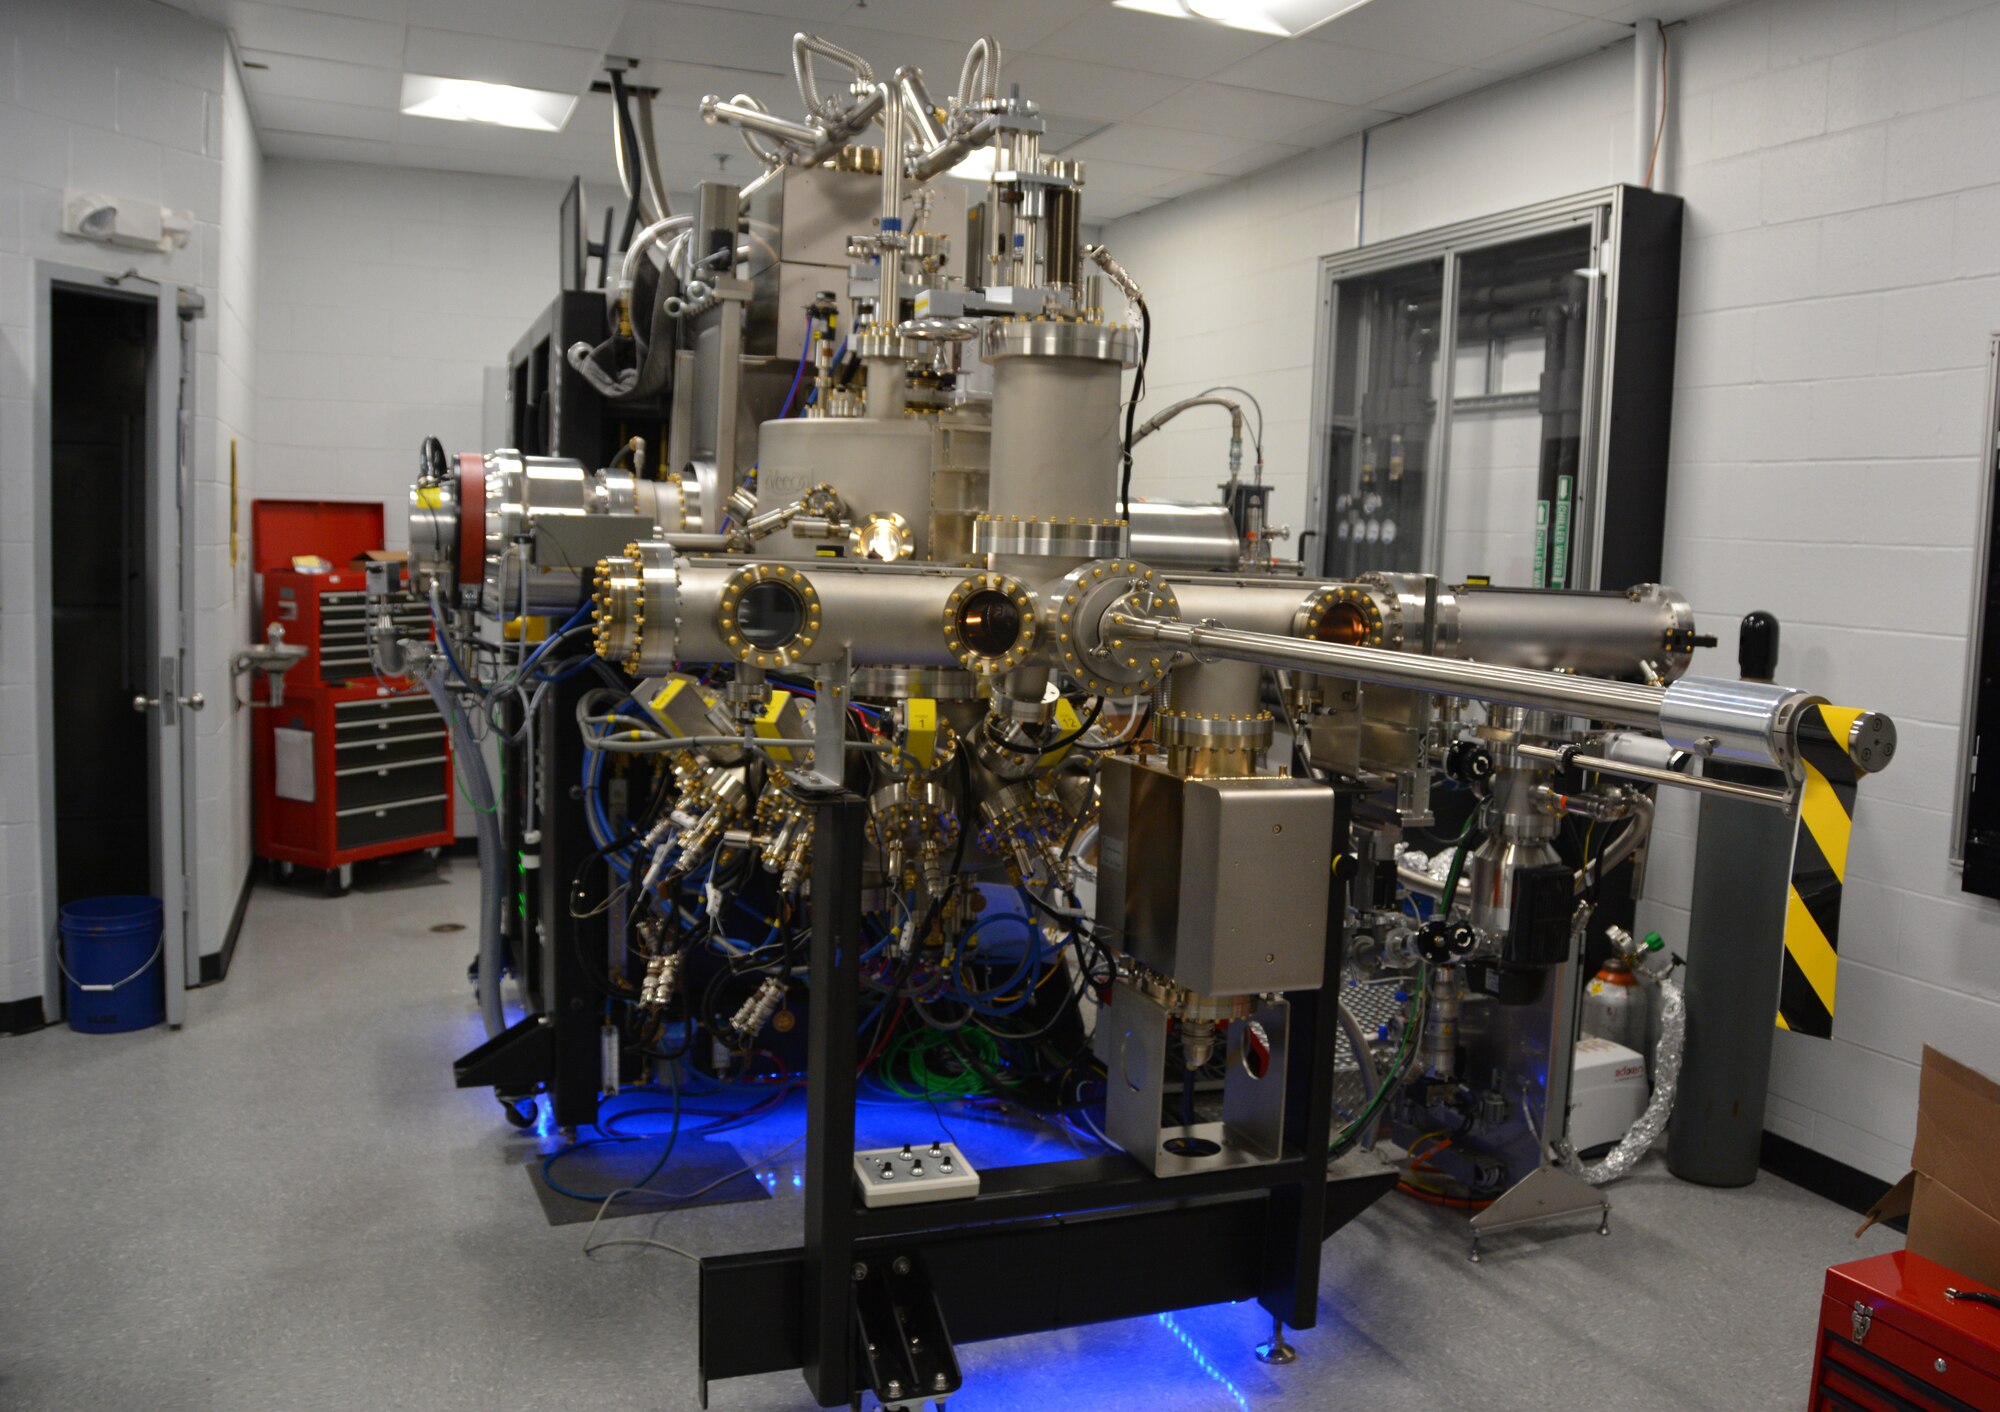 The new Molecular Beam Epitaxy chamber is at the center of AFRL’s Oxide Molecular Beam Epitaxy laboratory. This highly-specialized piece of equipment enables the growth of semiconducting materials for a new breed of advanced electronics. (U.S. Air Force Photo/Adrienne Kreighbaum)